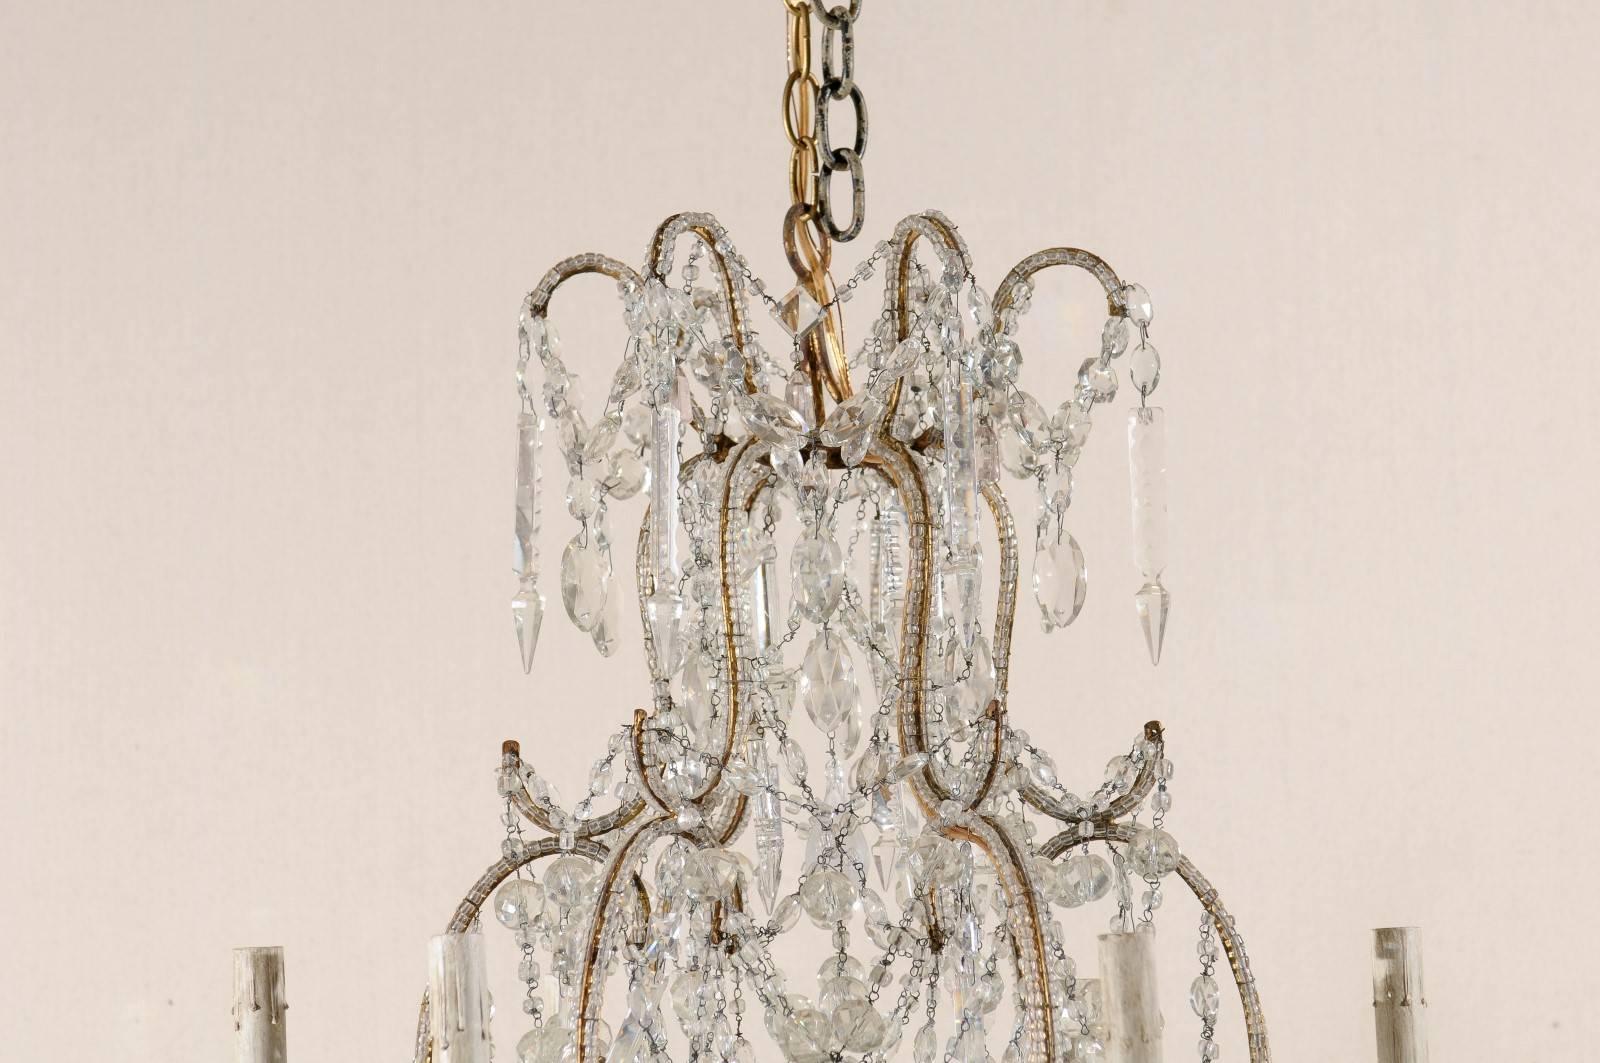 Beaded French Crystal and Gilded Iron Chandelier with Scroll Arms and Ornate Beading